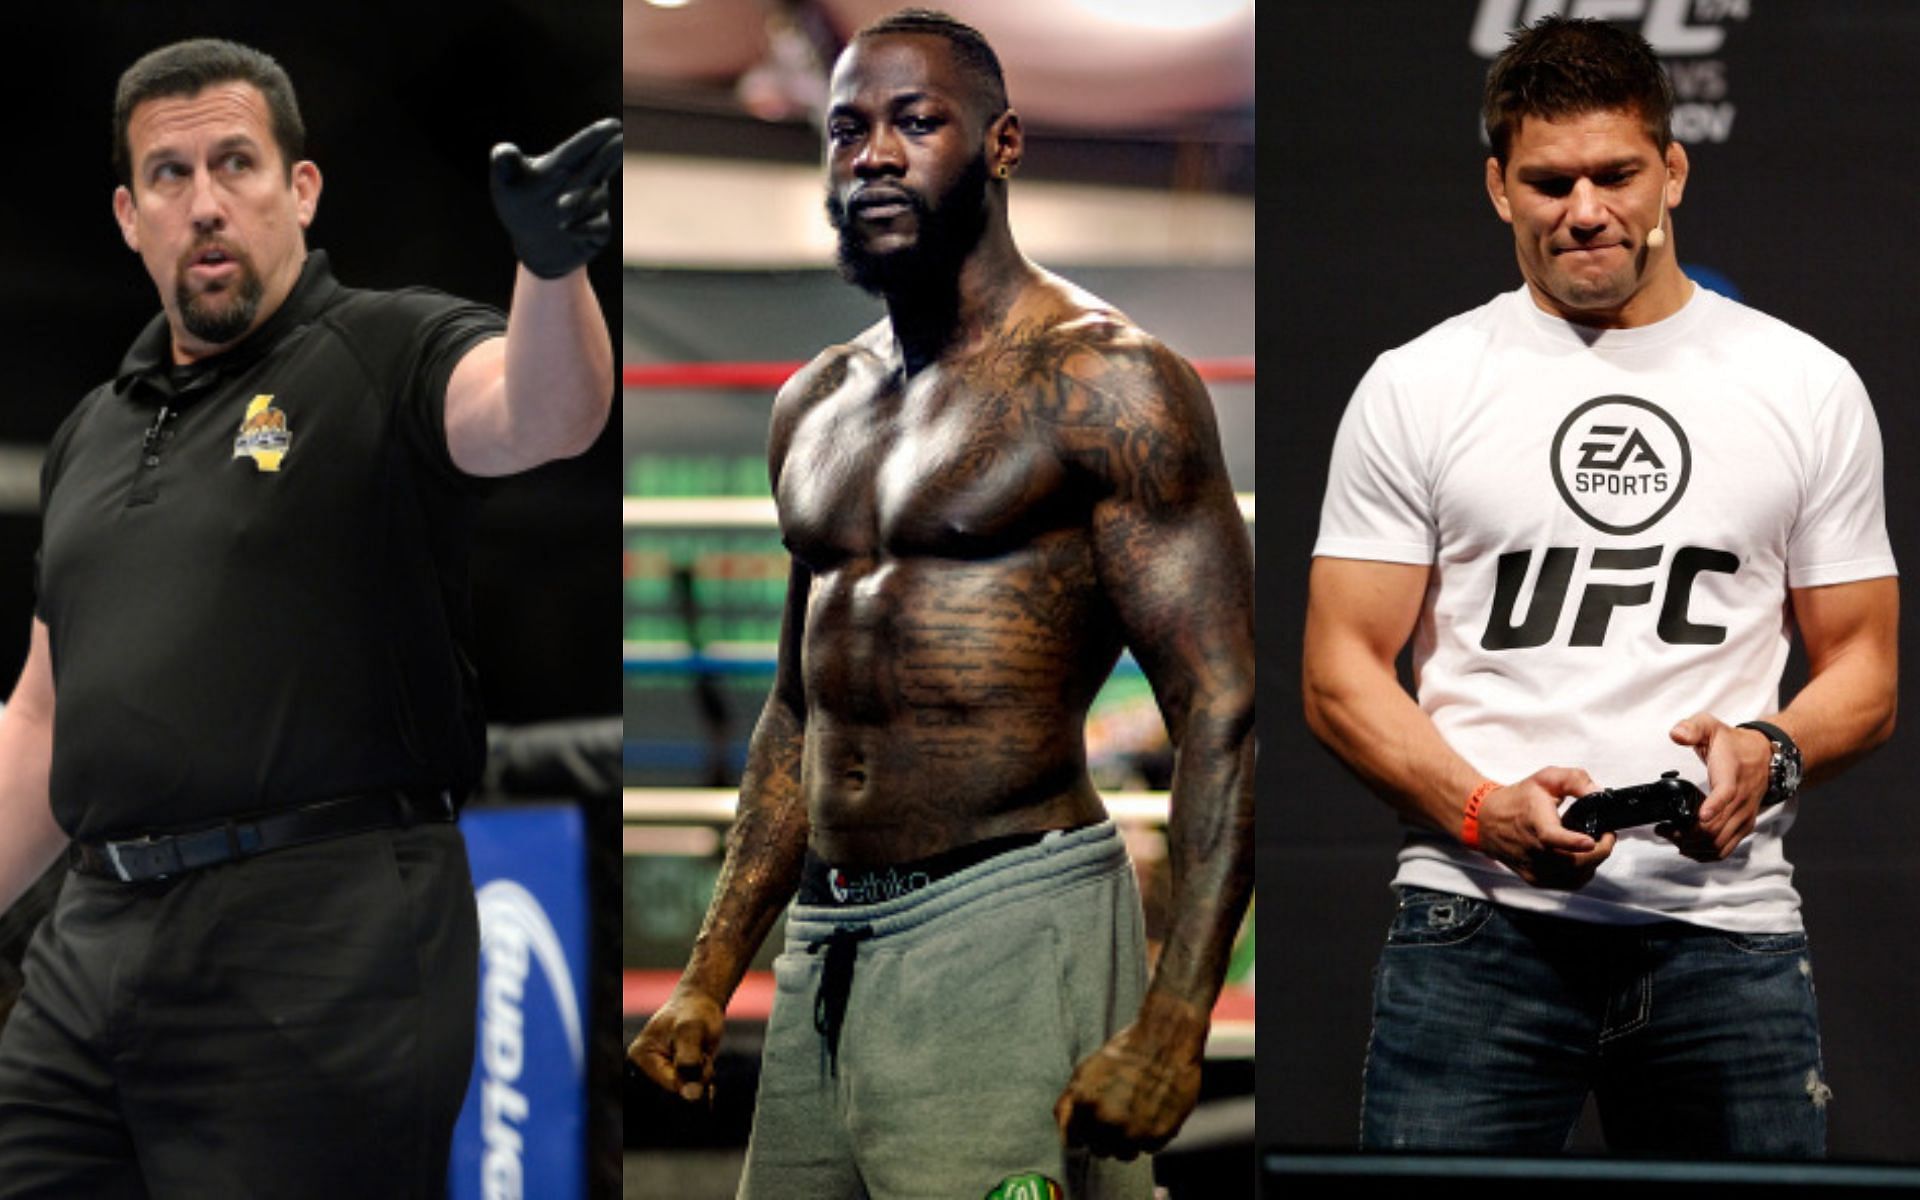 John McCarthy (left), Deontay Wilder (middle), and Josh Thomson (right)(Images via Getty)